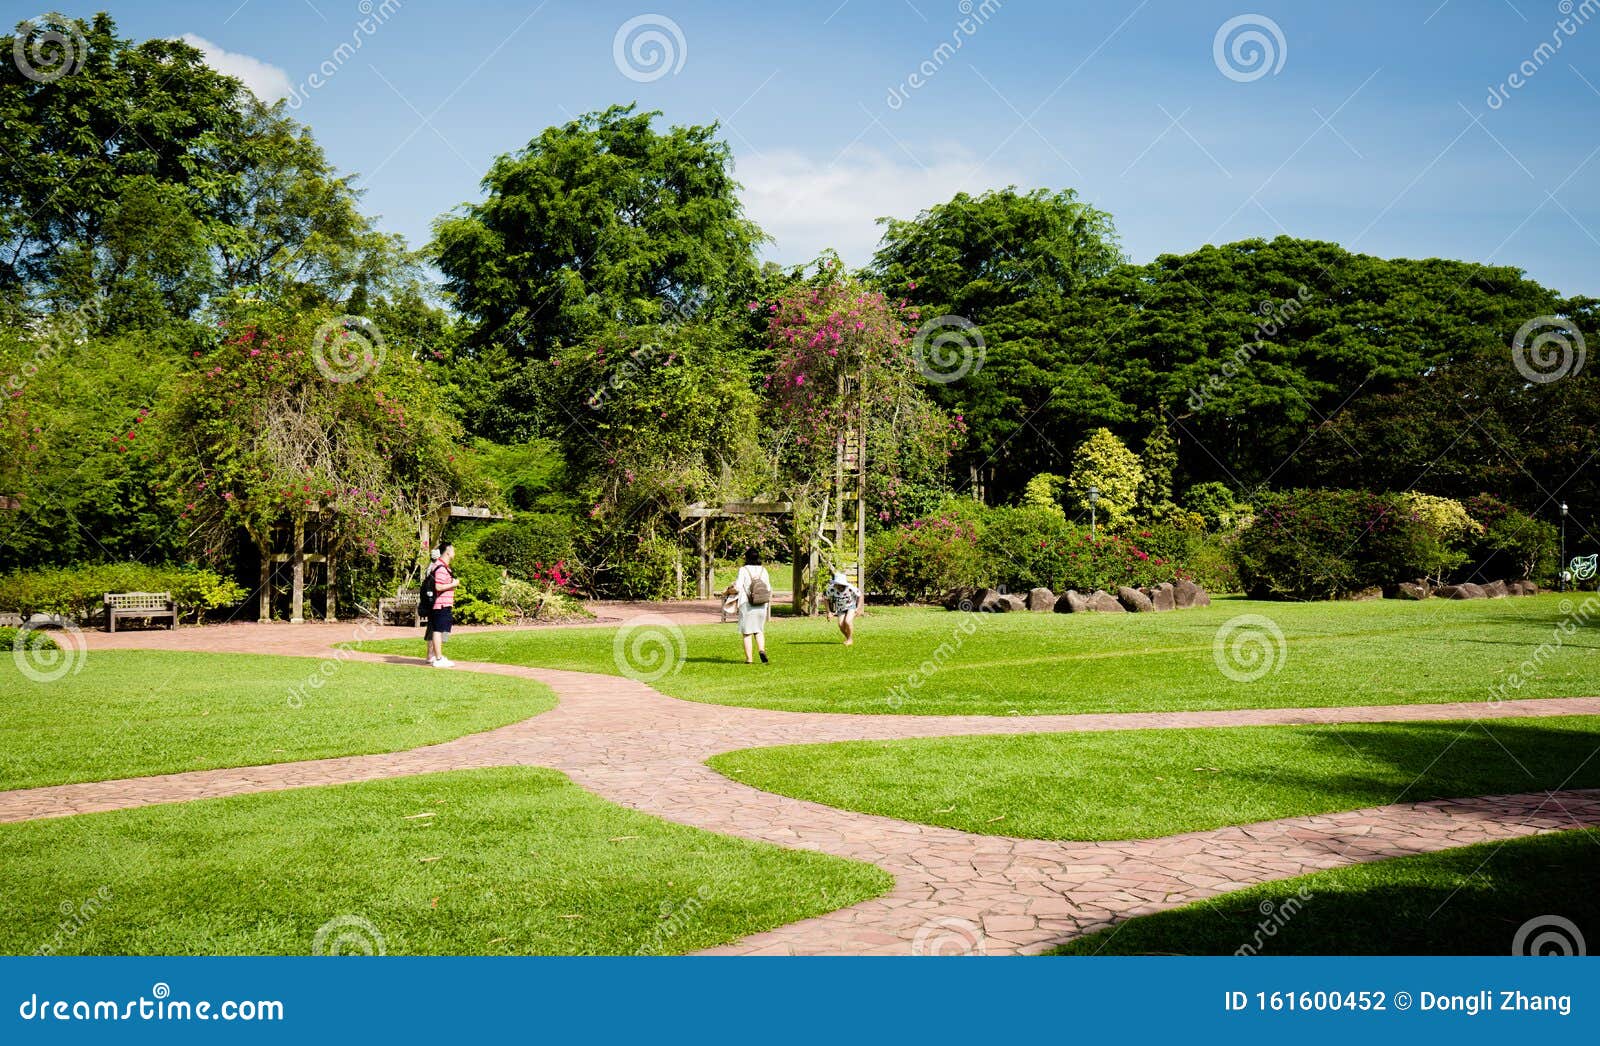 501 Botanical People Singapore Photos Free Royalty Free Stock Photos From Dreamstime